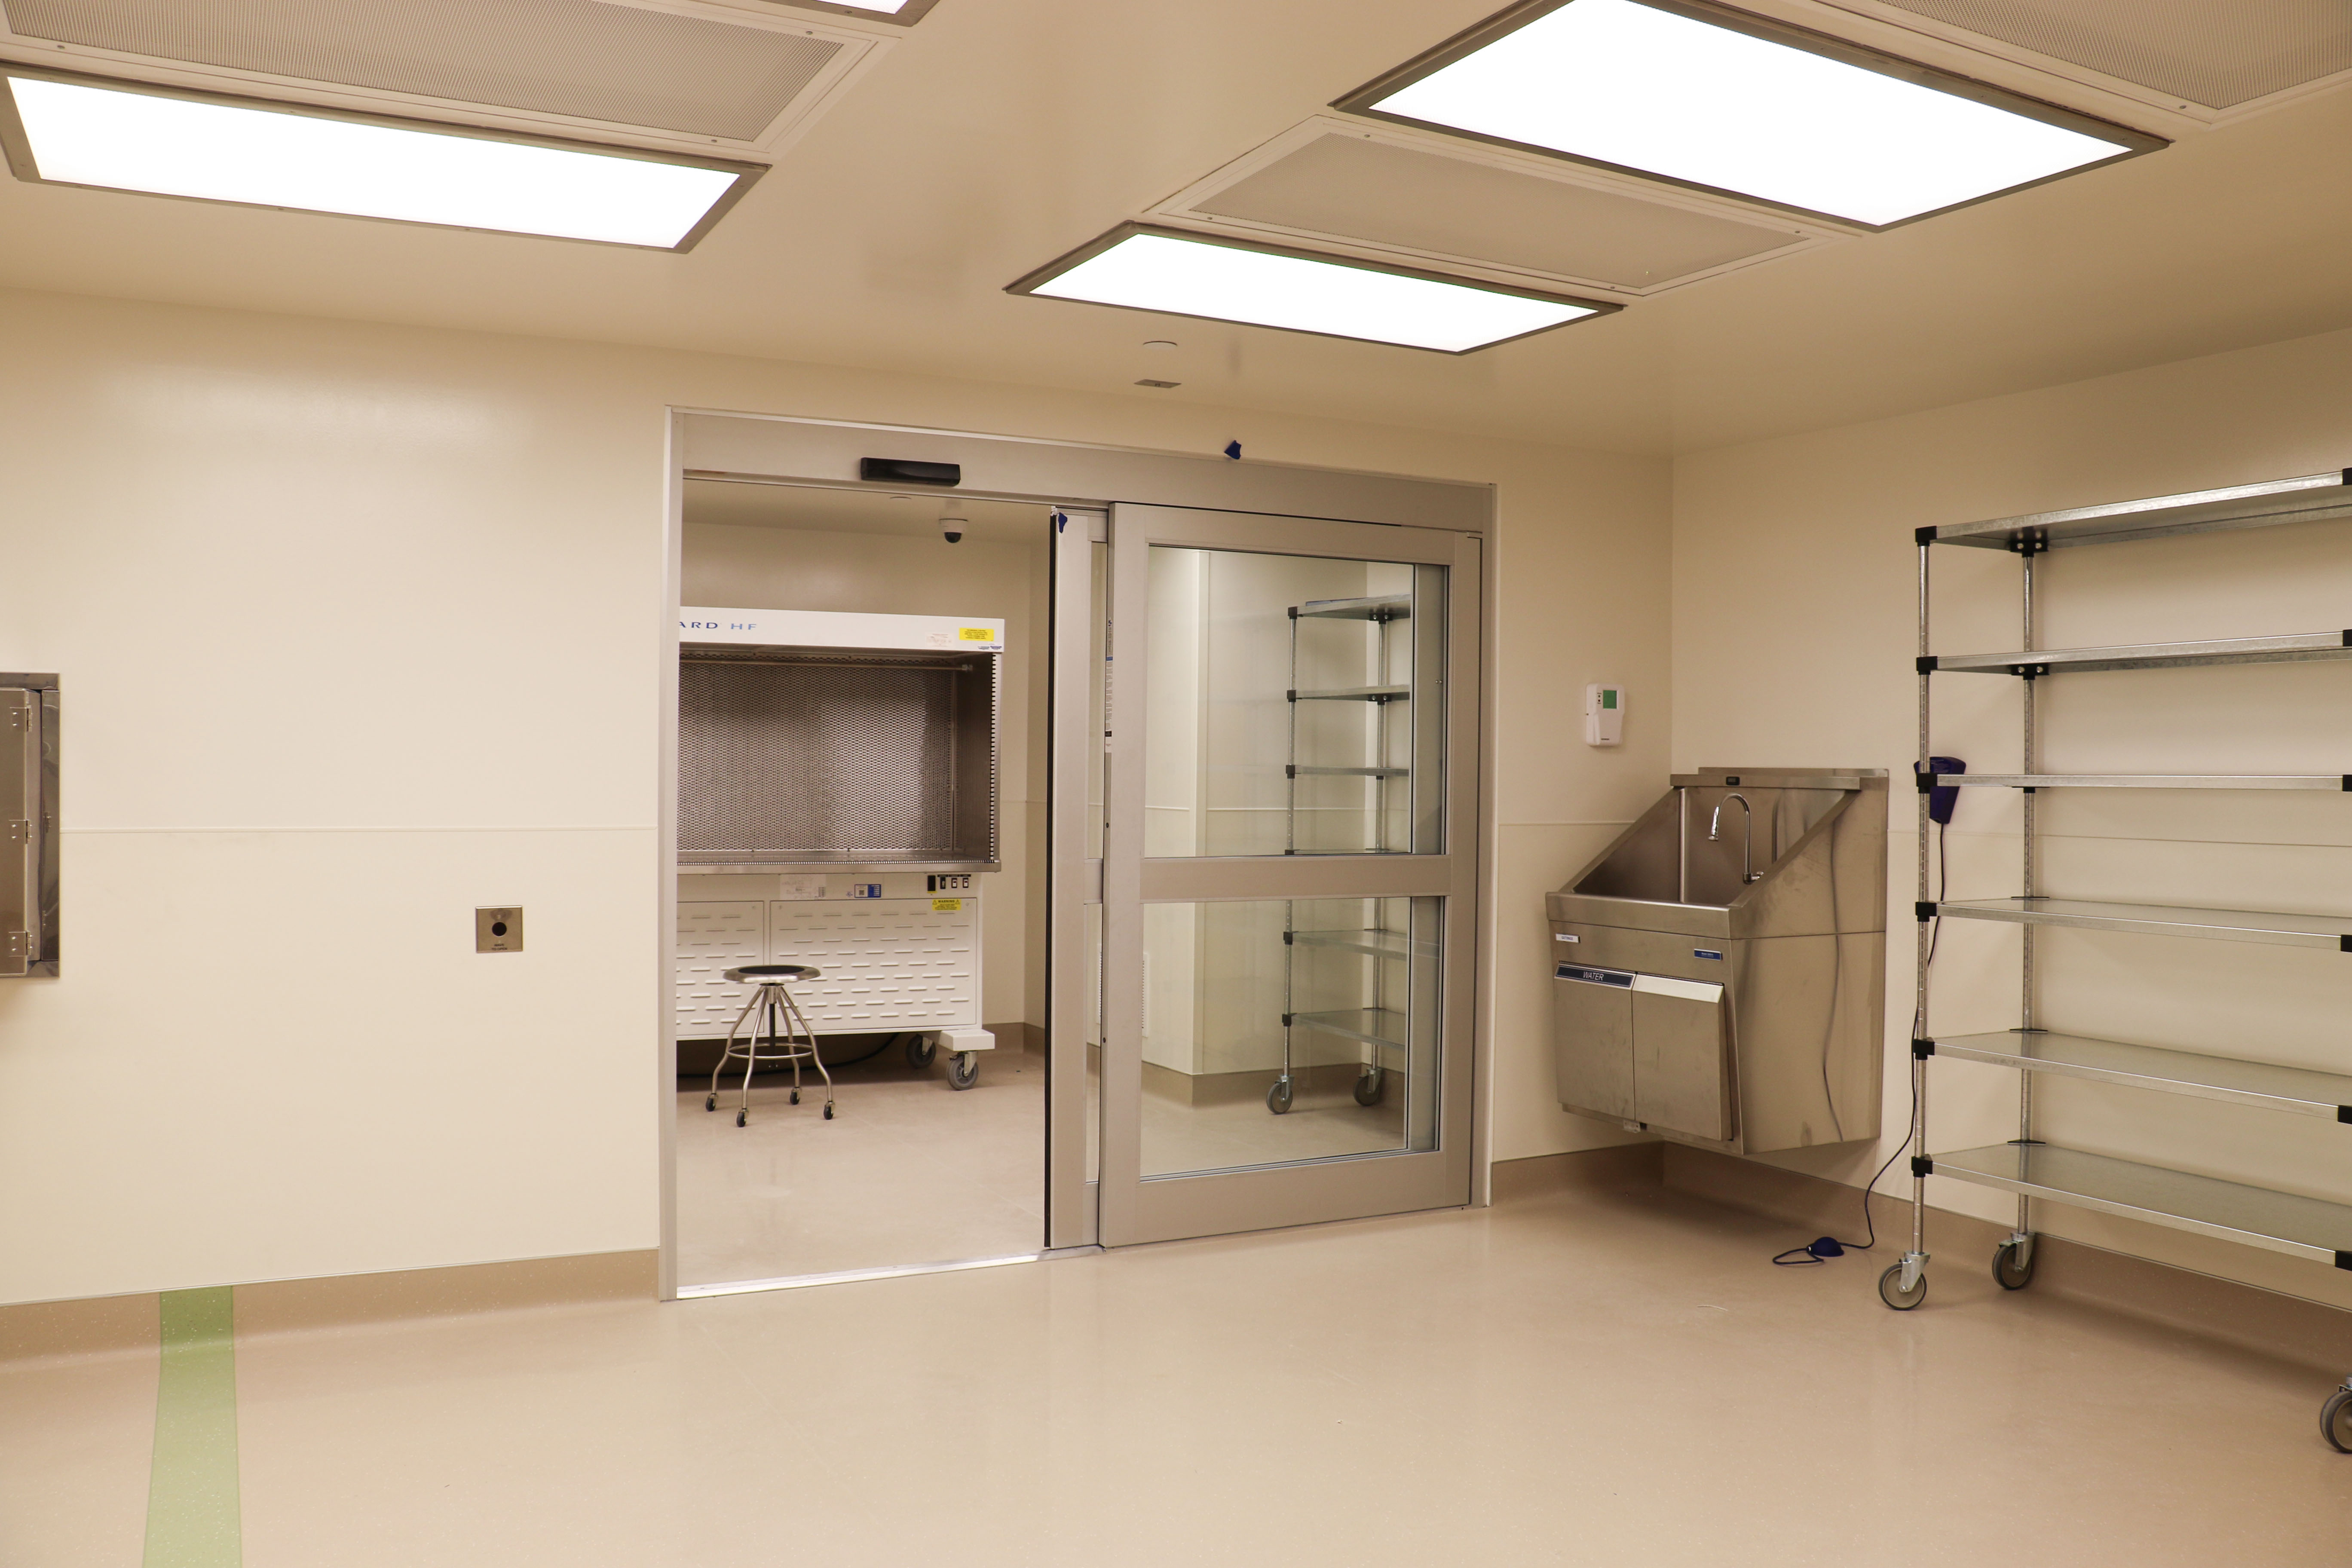 The pharmacy was renovated from an existing lab in the North Colorado Medical Center